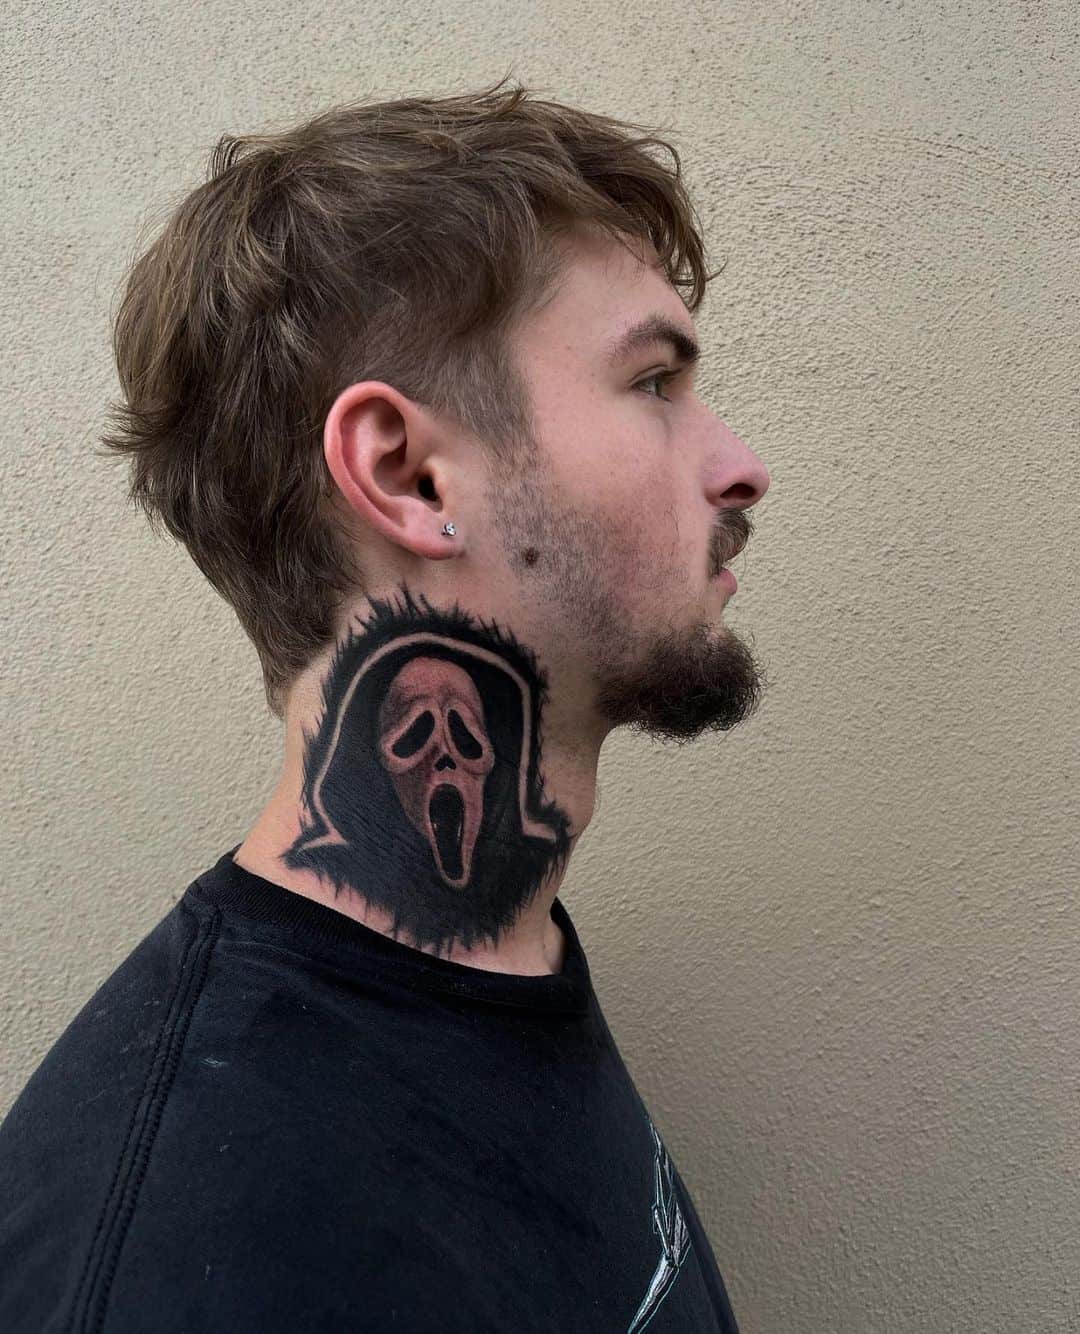 20 of the most hardcore neck tattoos for men!